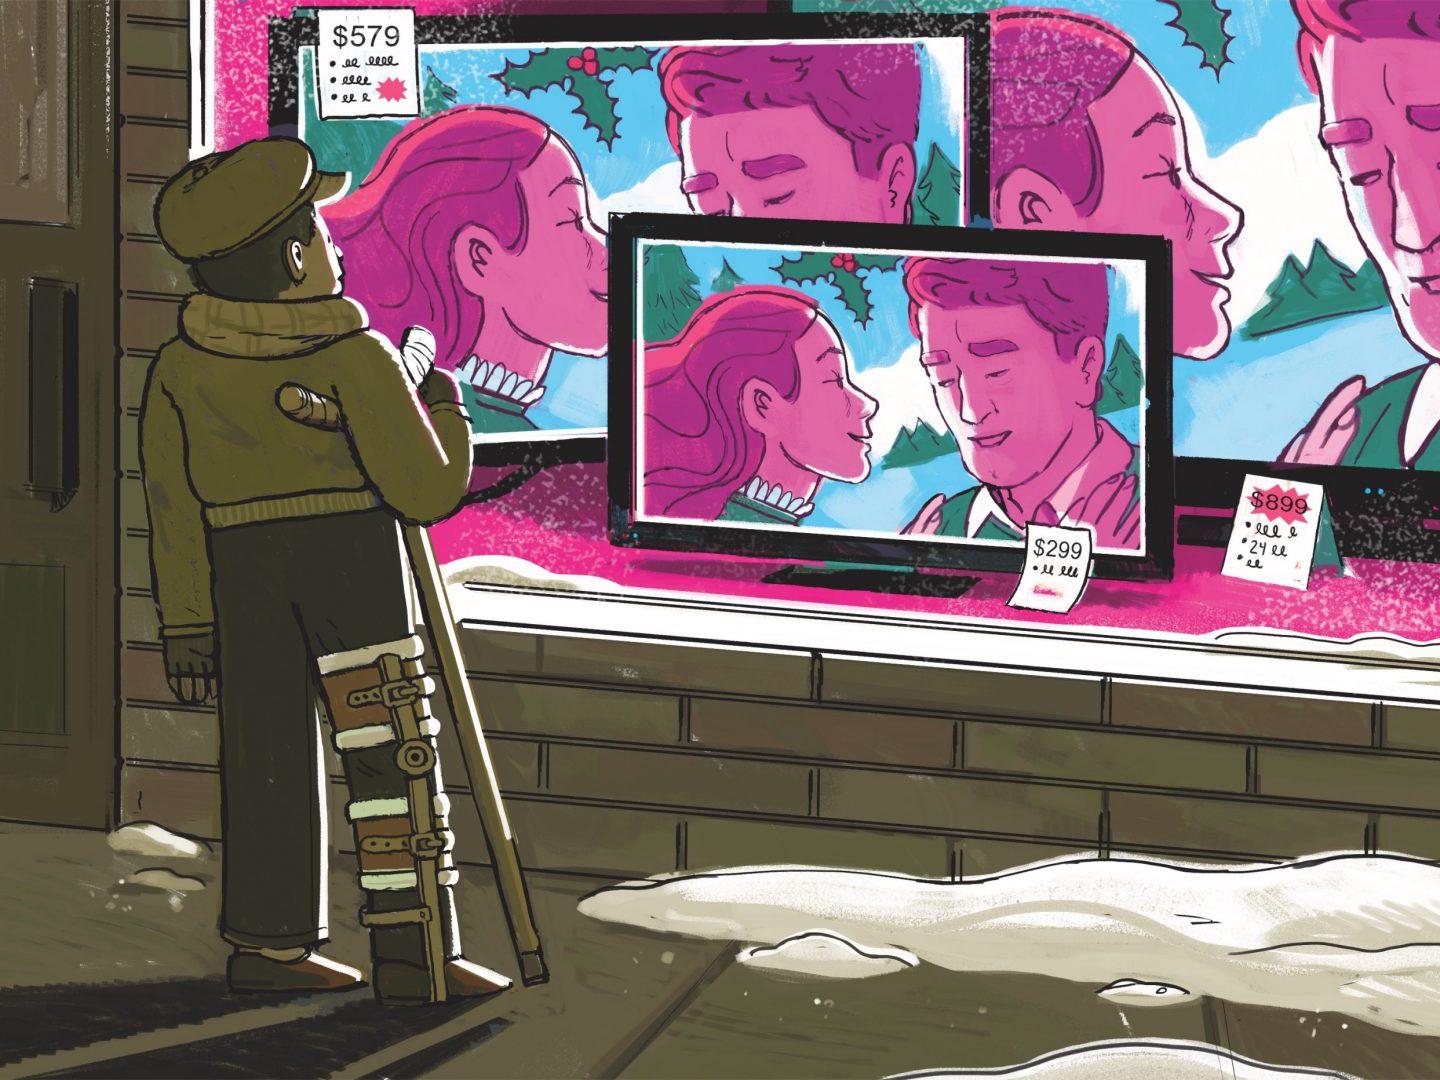 person with crutch (modeled after Tiny Tim from a Christmas Carol) stands in front of a window showing TVs with a romantic scene